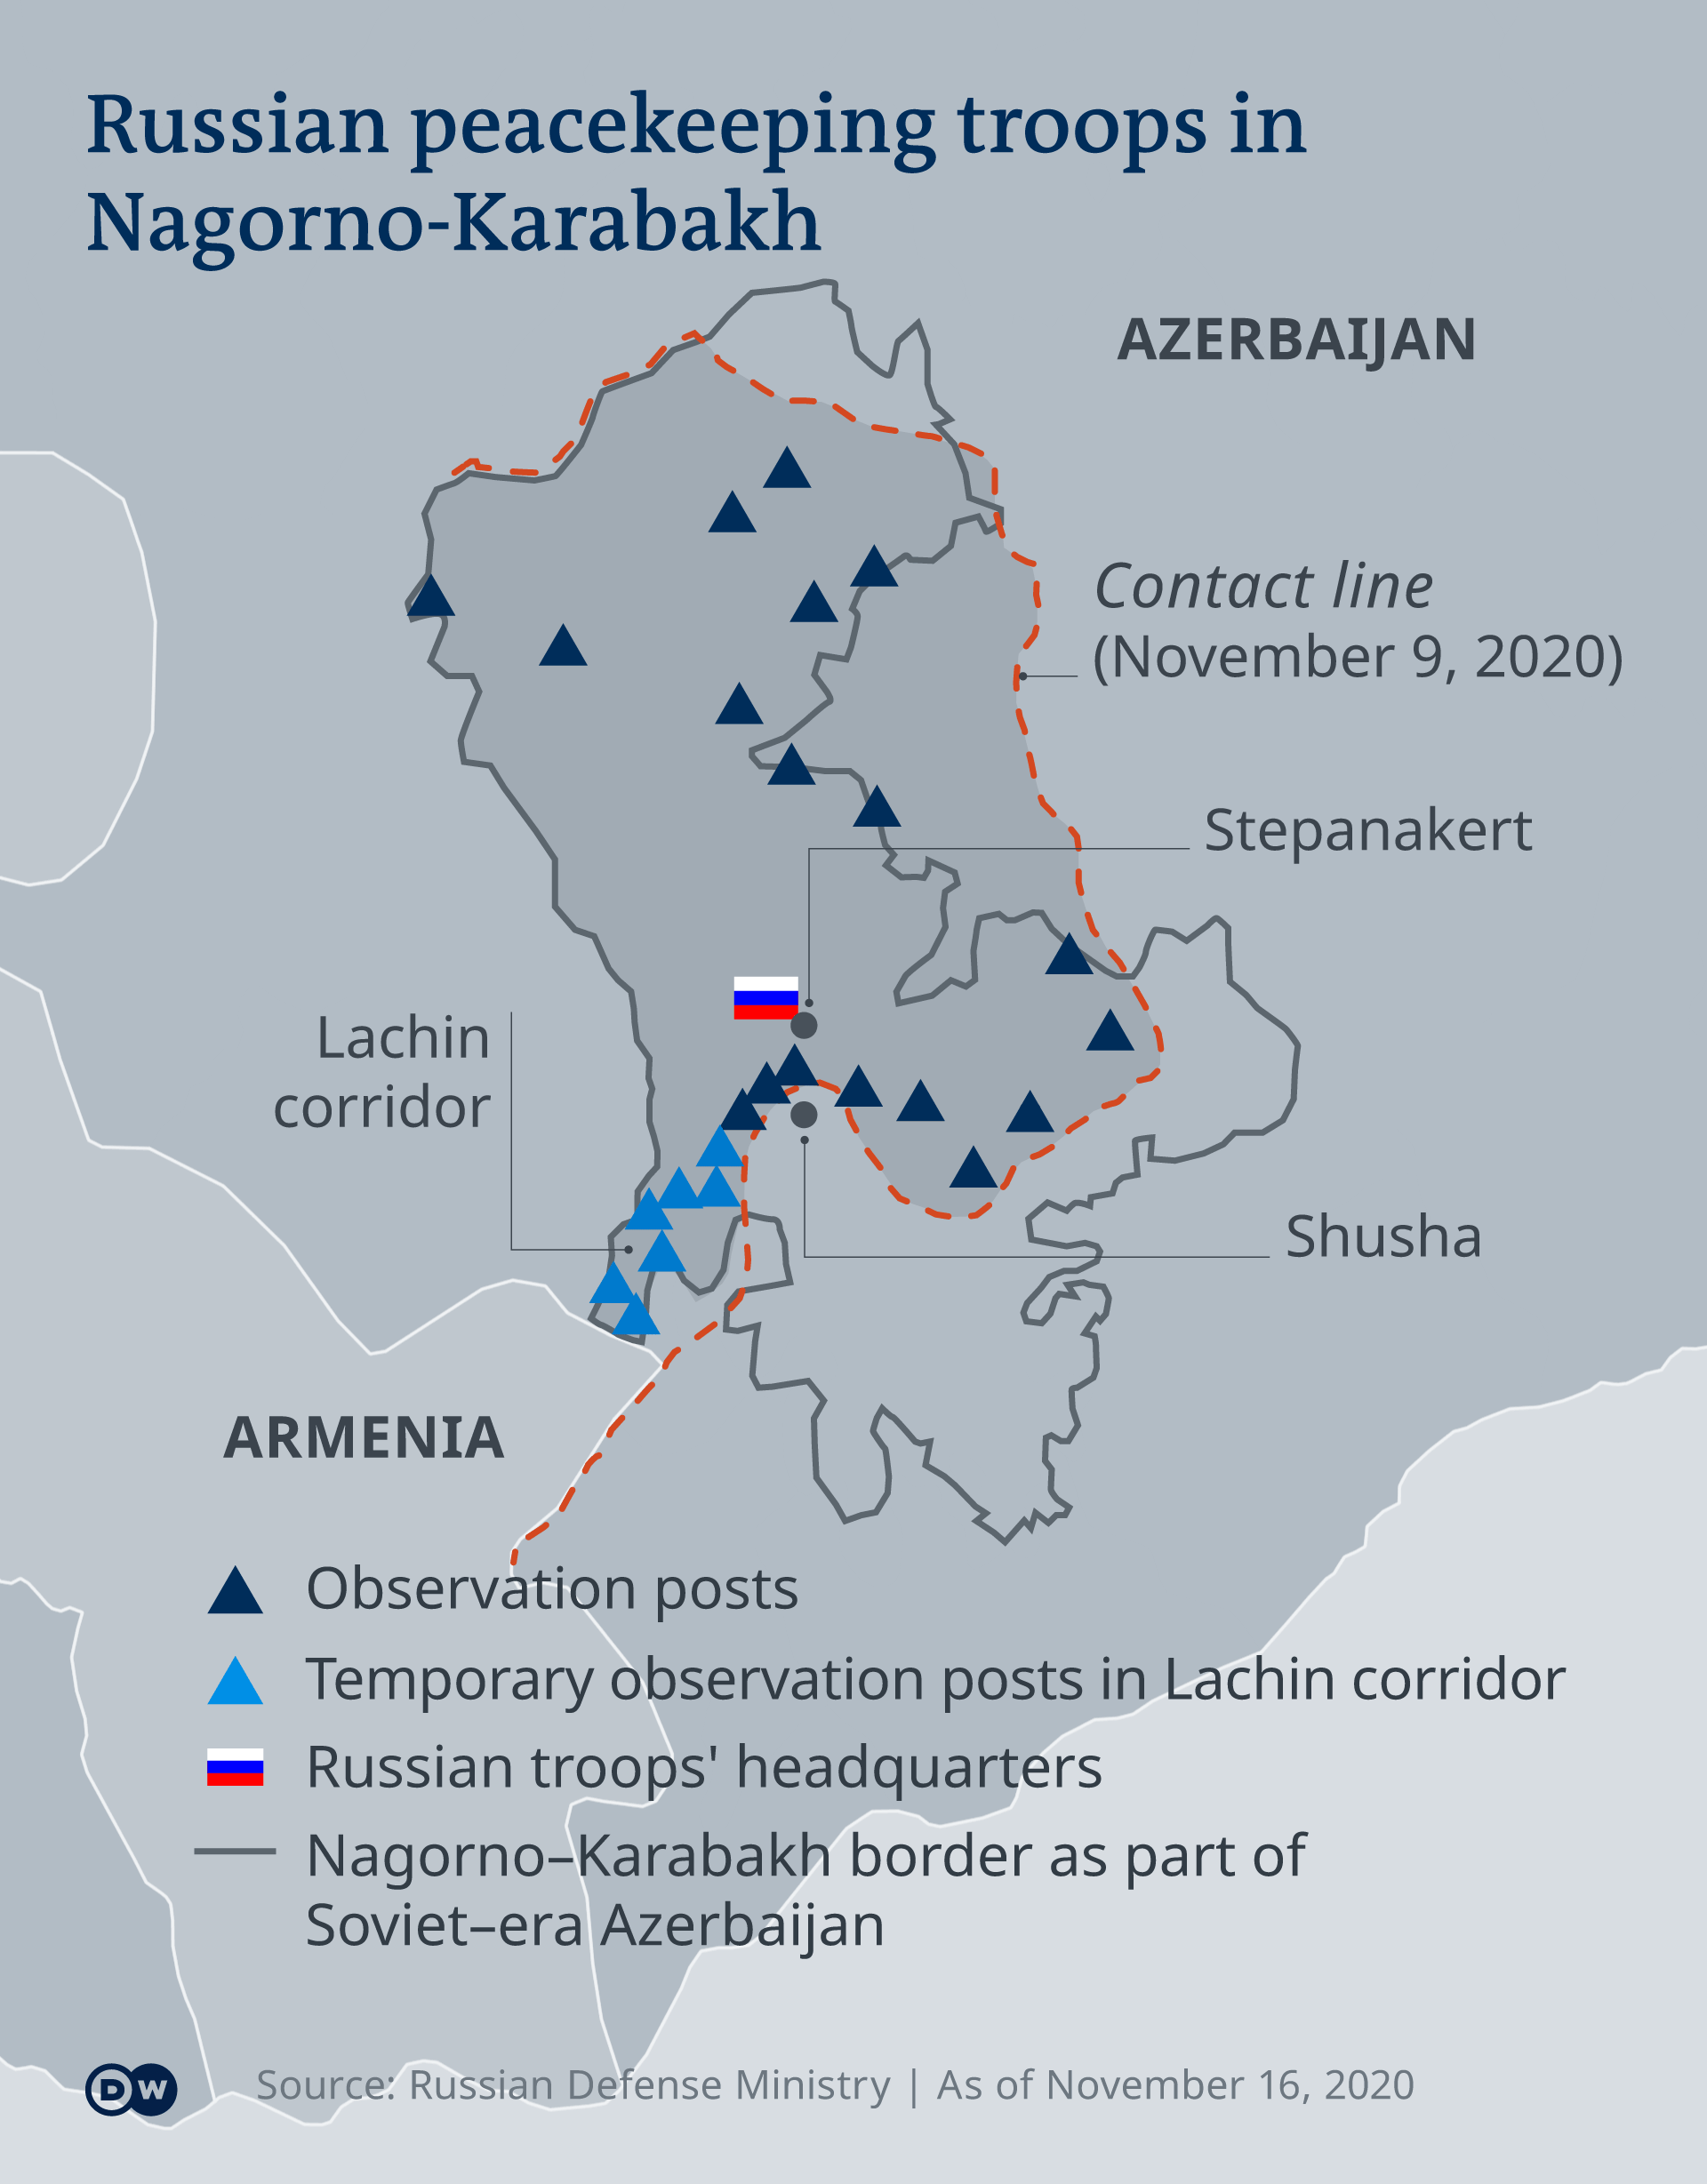 Map showing Russia peacekeeping contingents in Nagorno-Karabakh